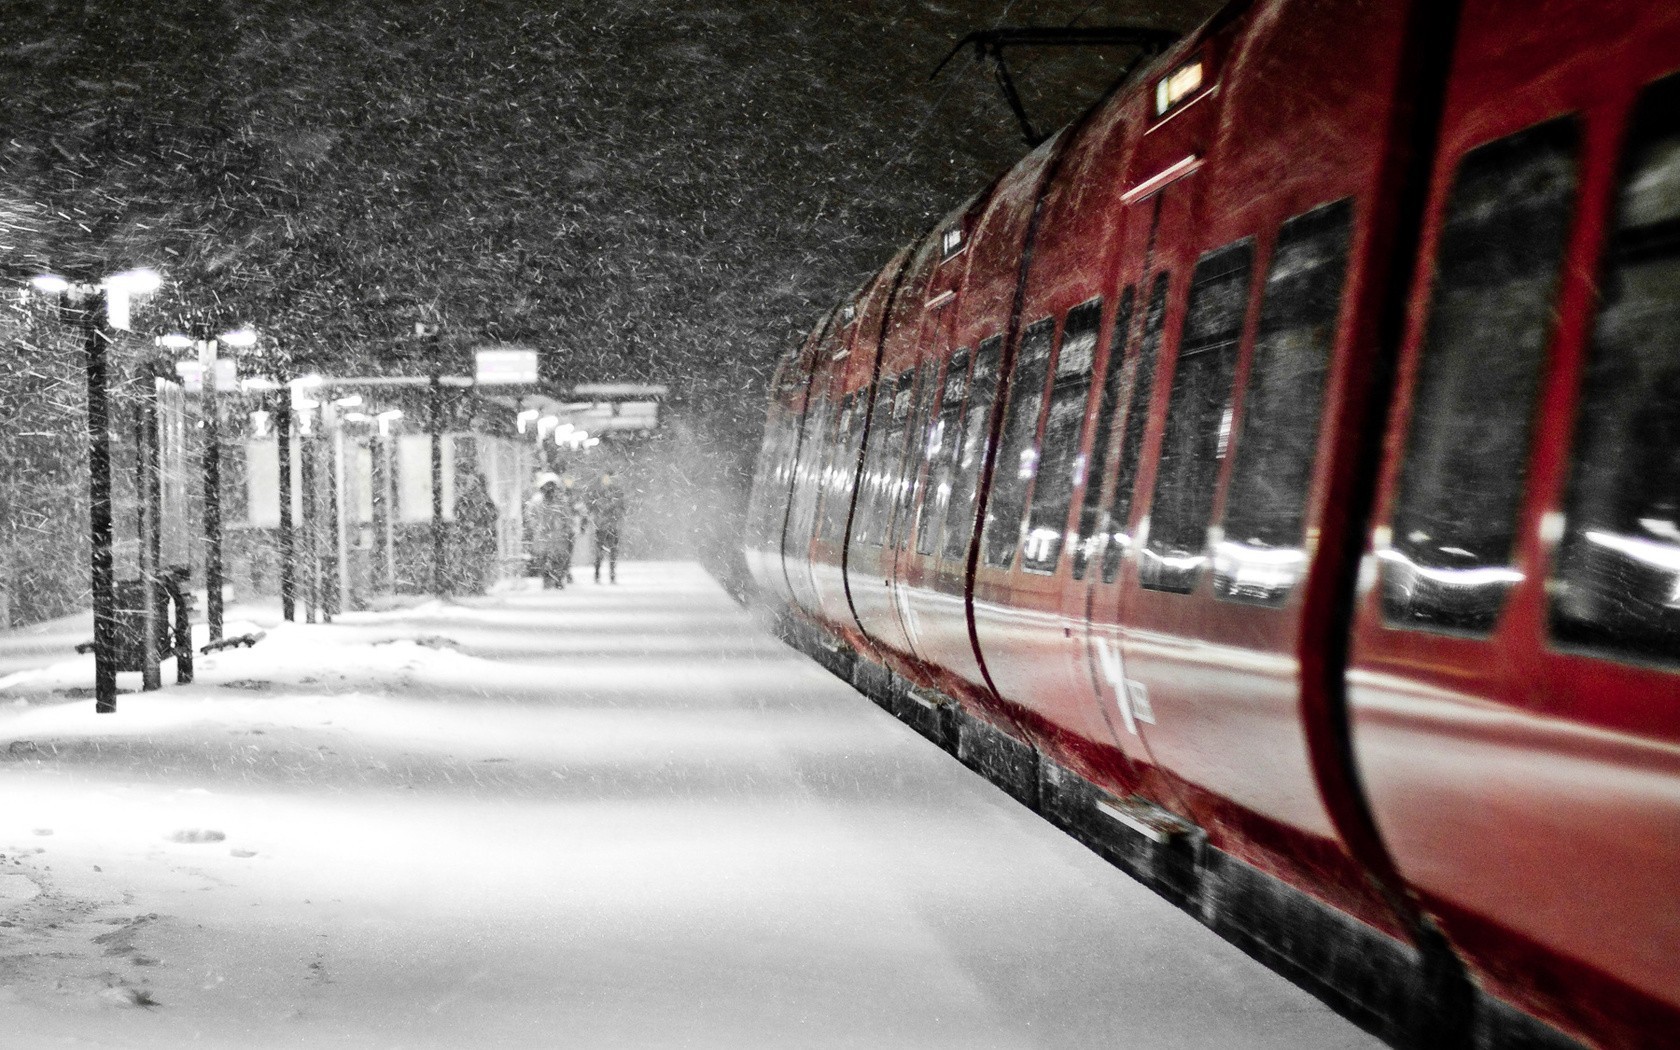 General 1680x1050 train winter train station selective coloring vehicle snow